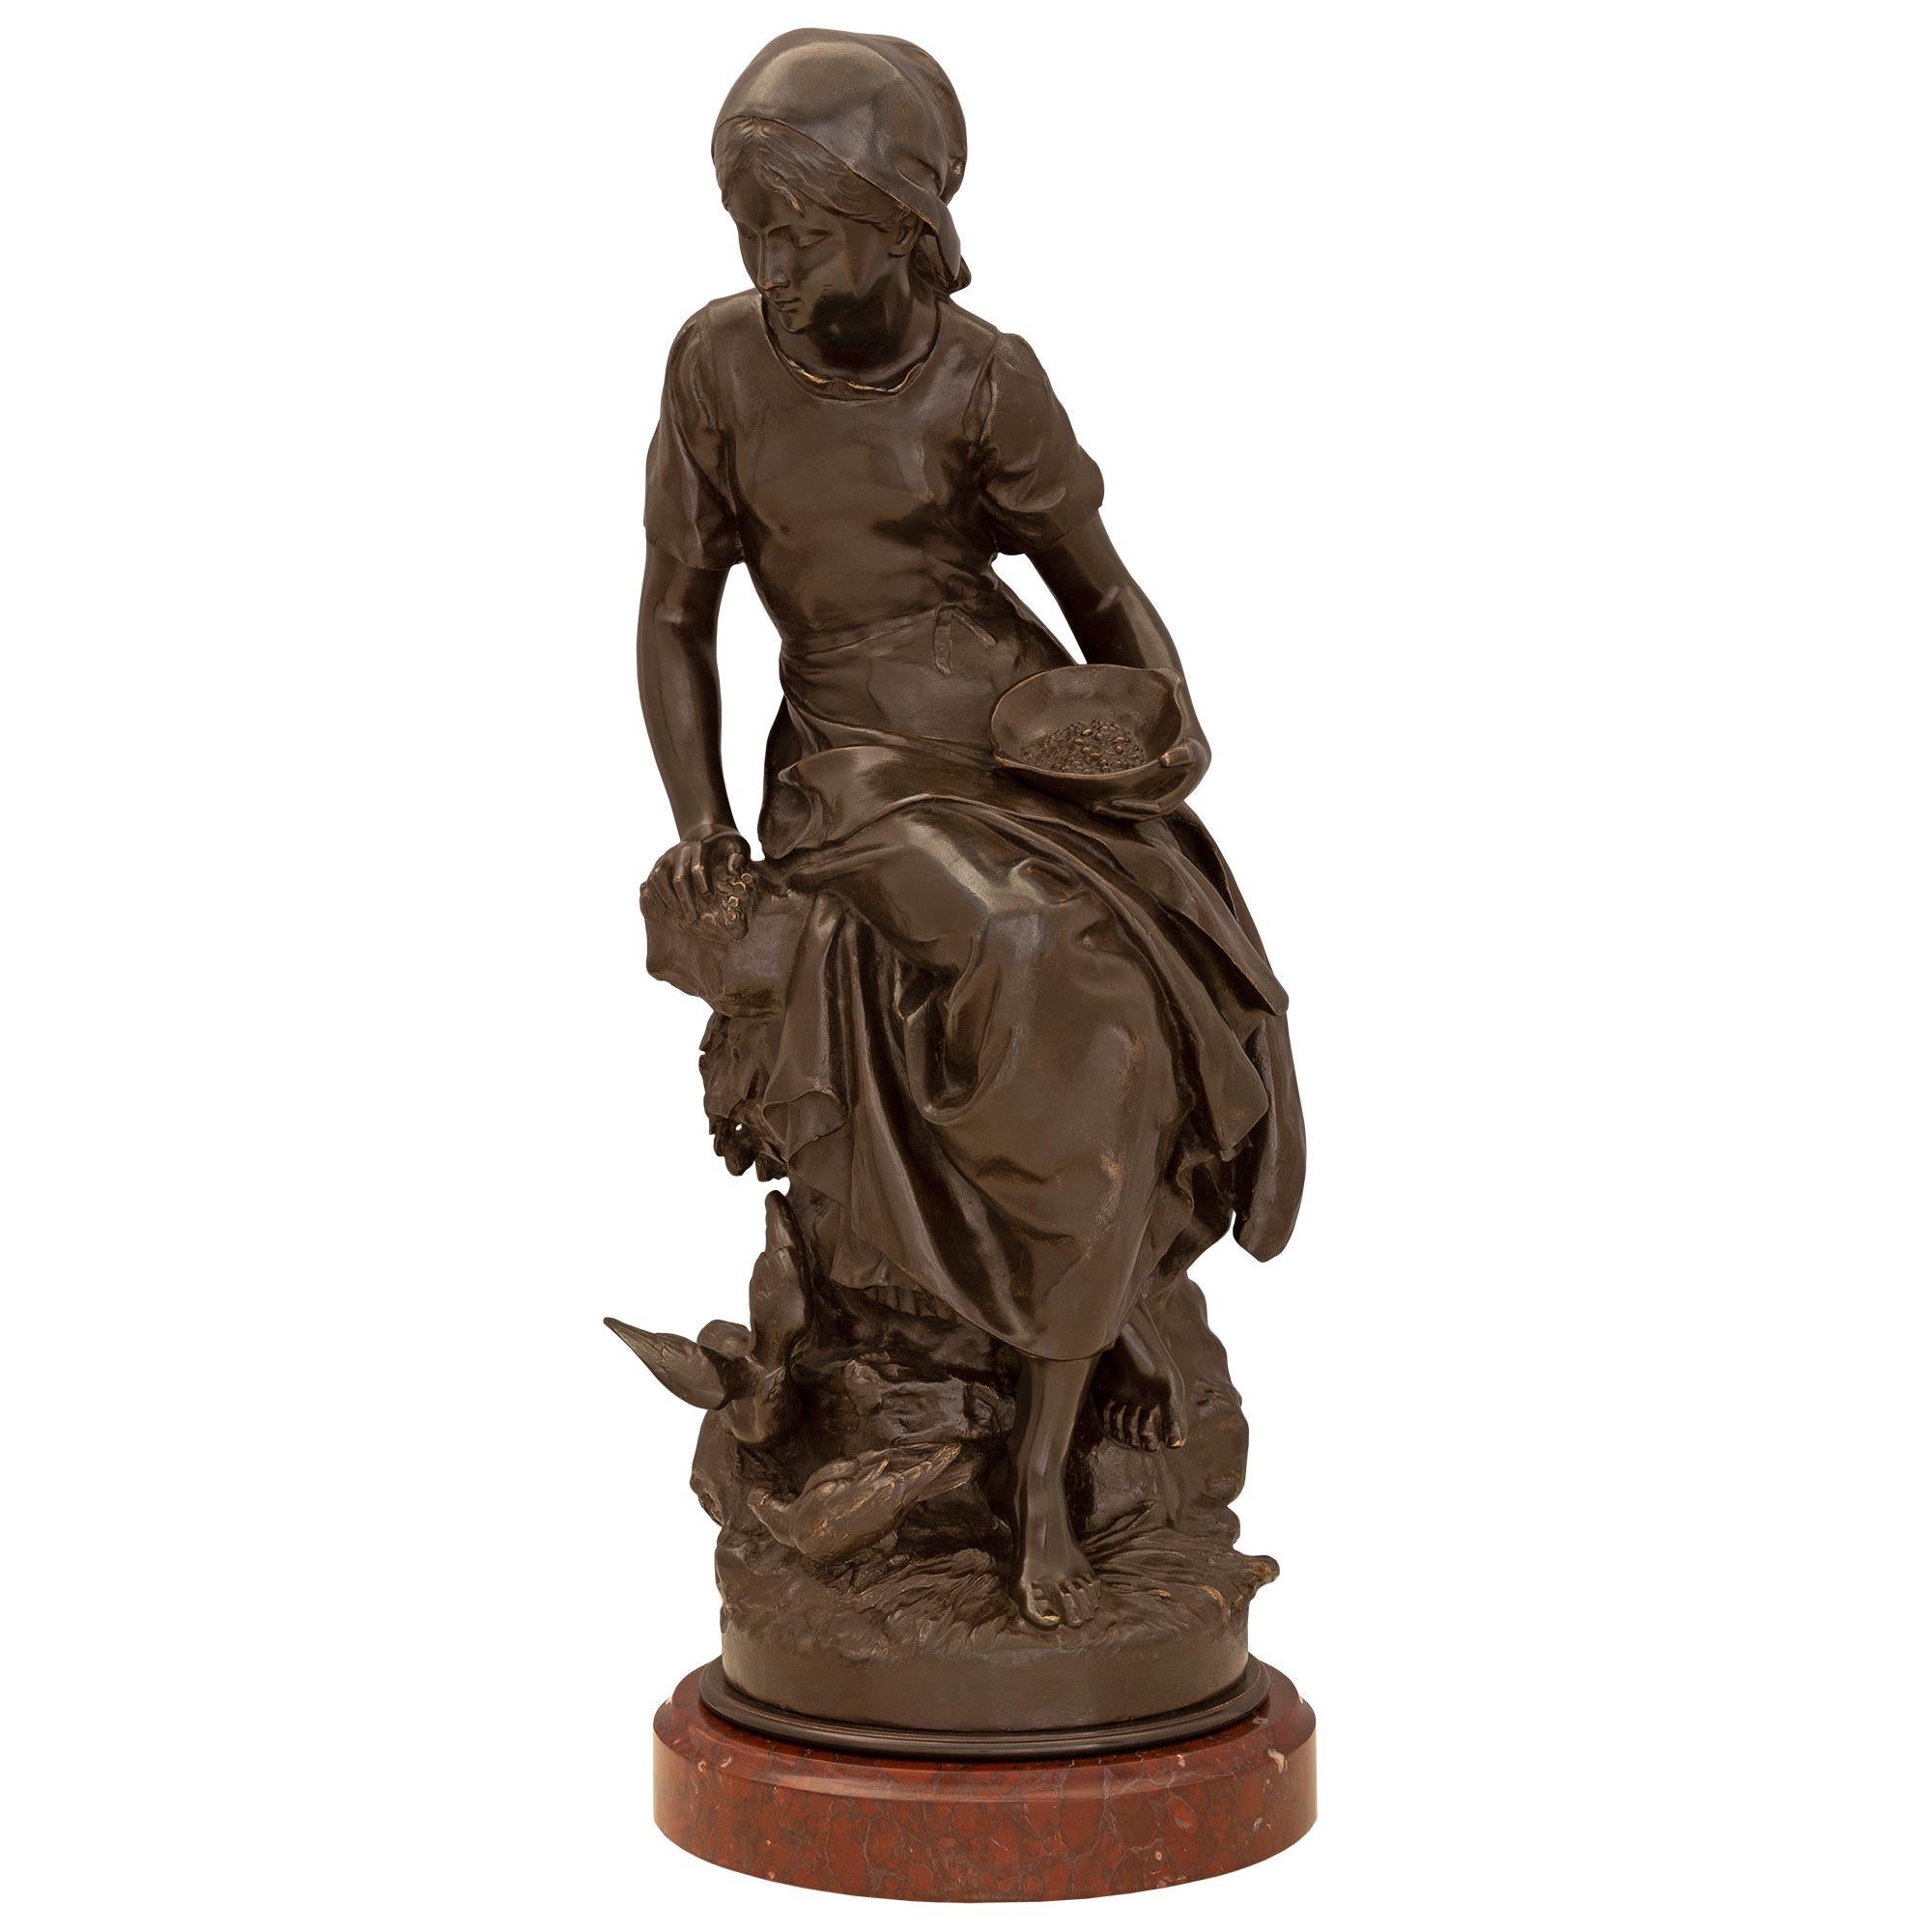 A charming high quality French 19th century patinated bronze statue named 'Paysanne nourrissant des oiseaux', by Mathurin Moreau. The elegant statue is raised by a circular mottled Rouge Griotte marble base below a finely detailed terrain designed